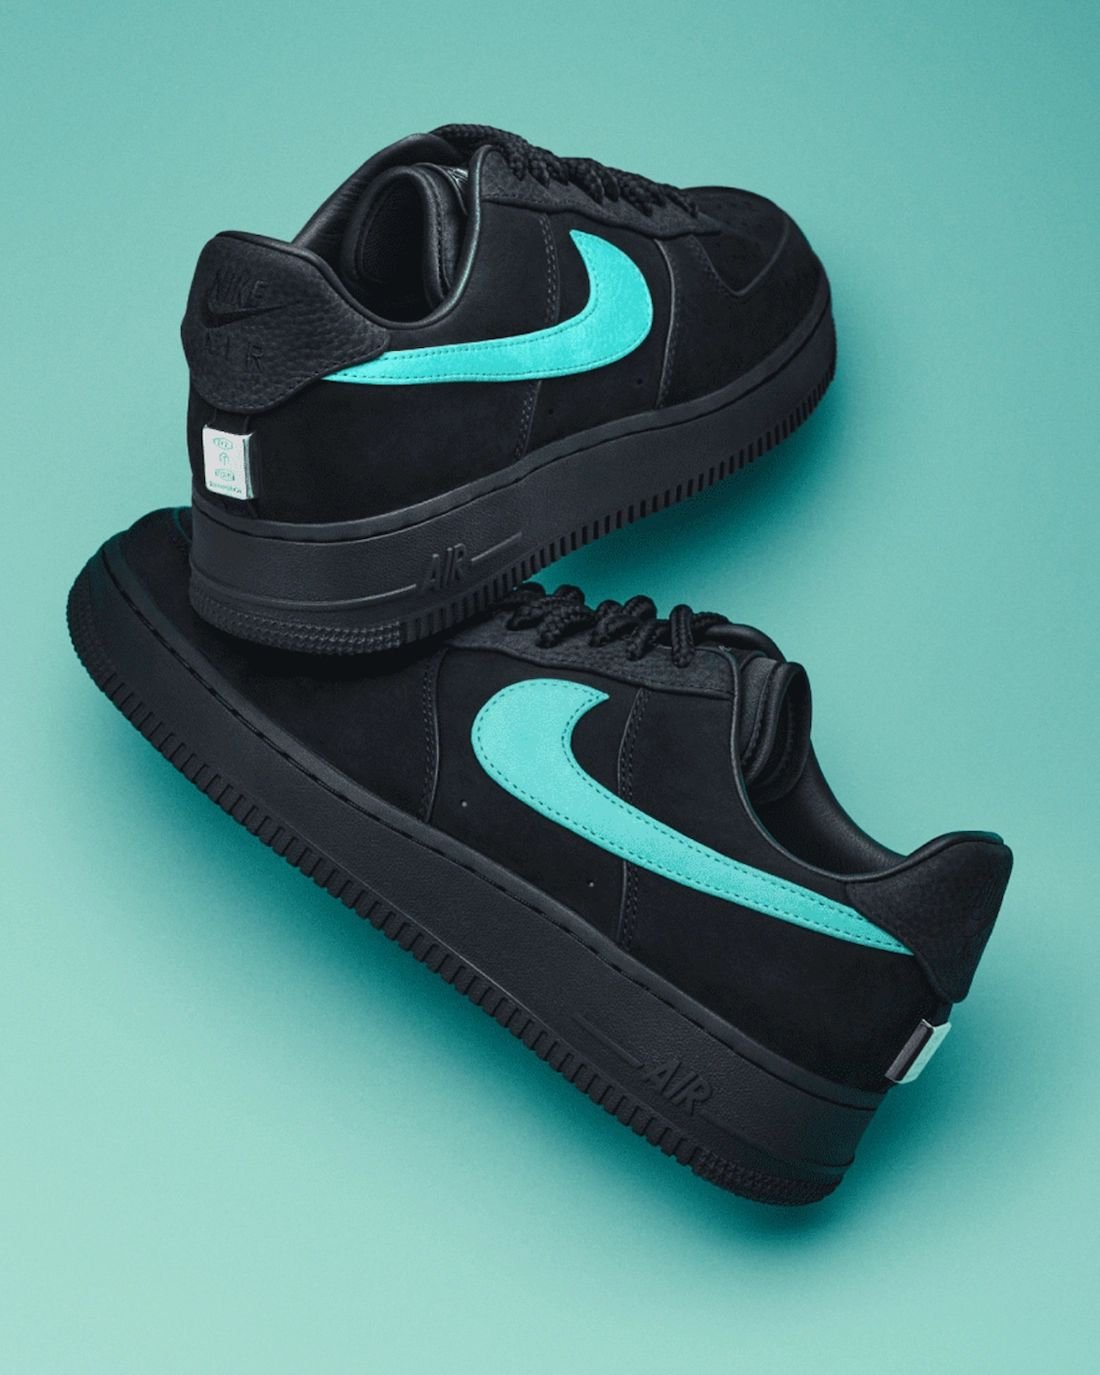 Tiffany Nike Air Force 1 Low DZ1382-001 Release Date Price